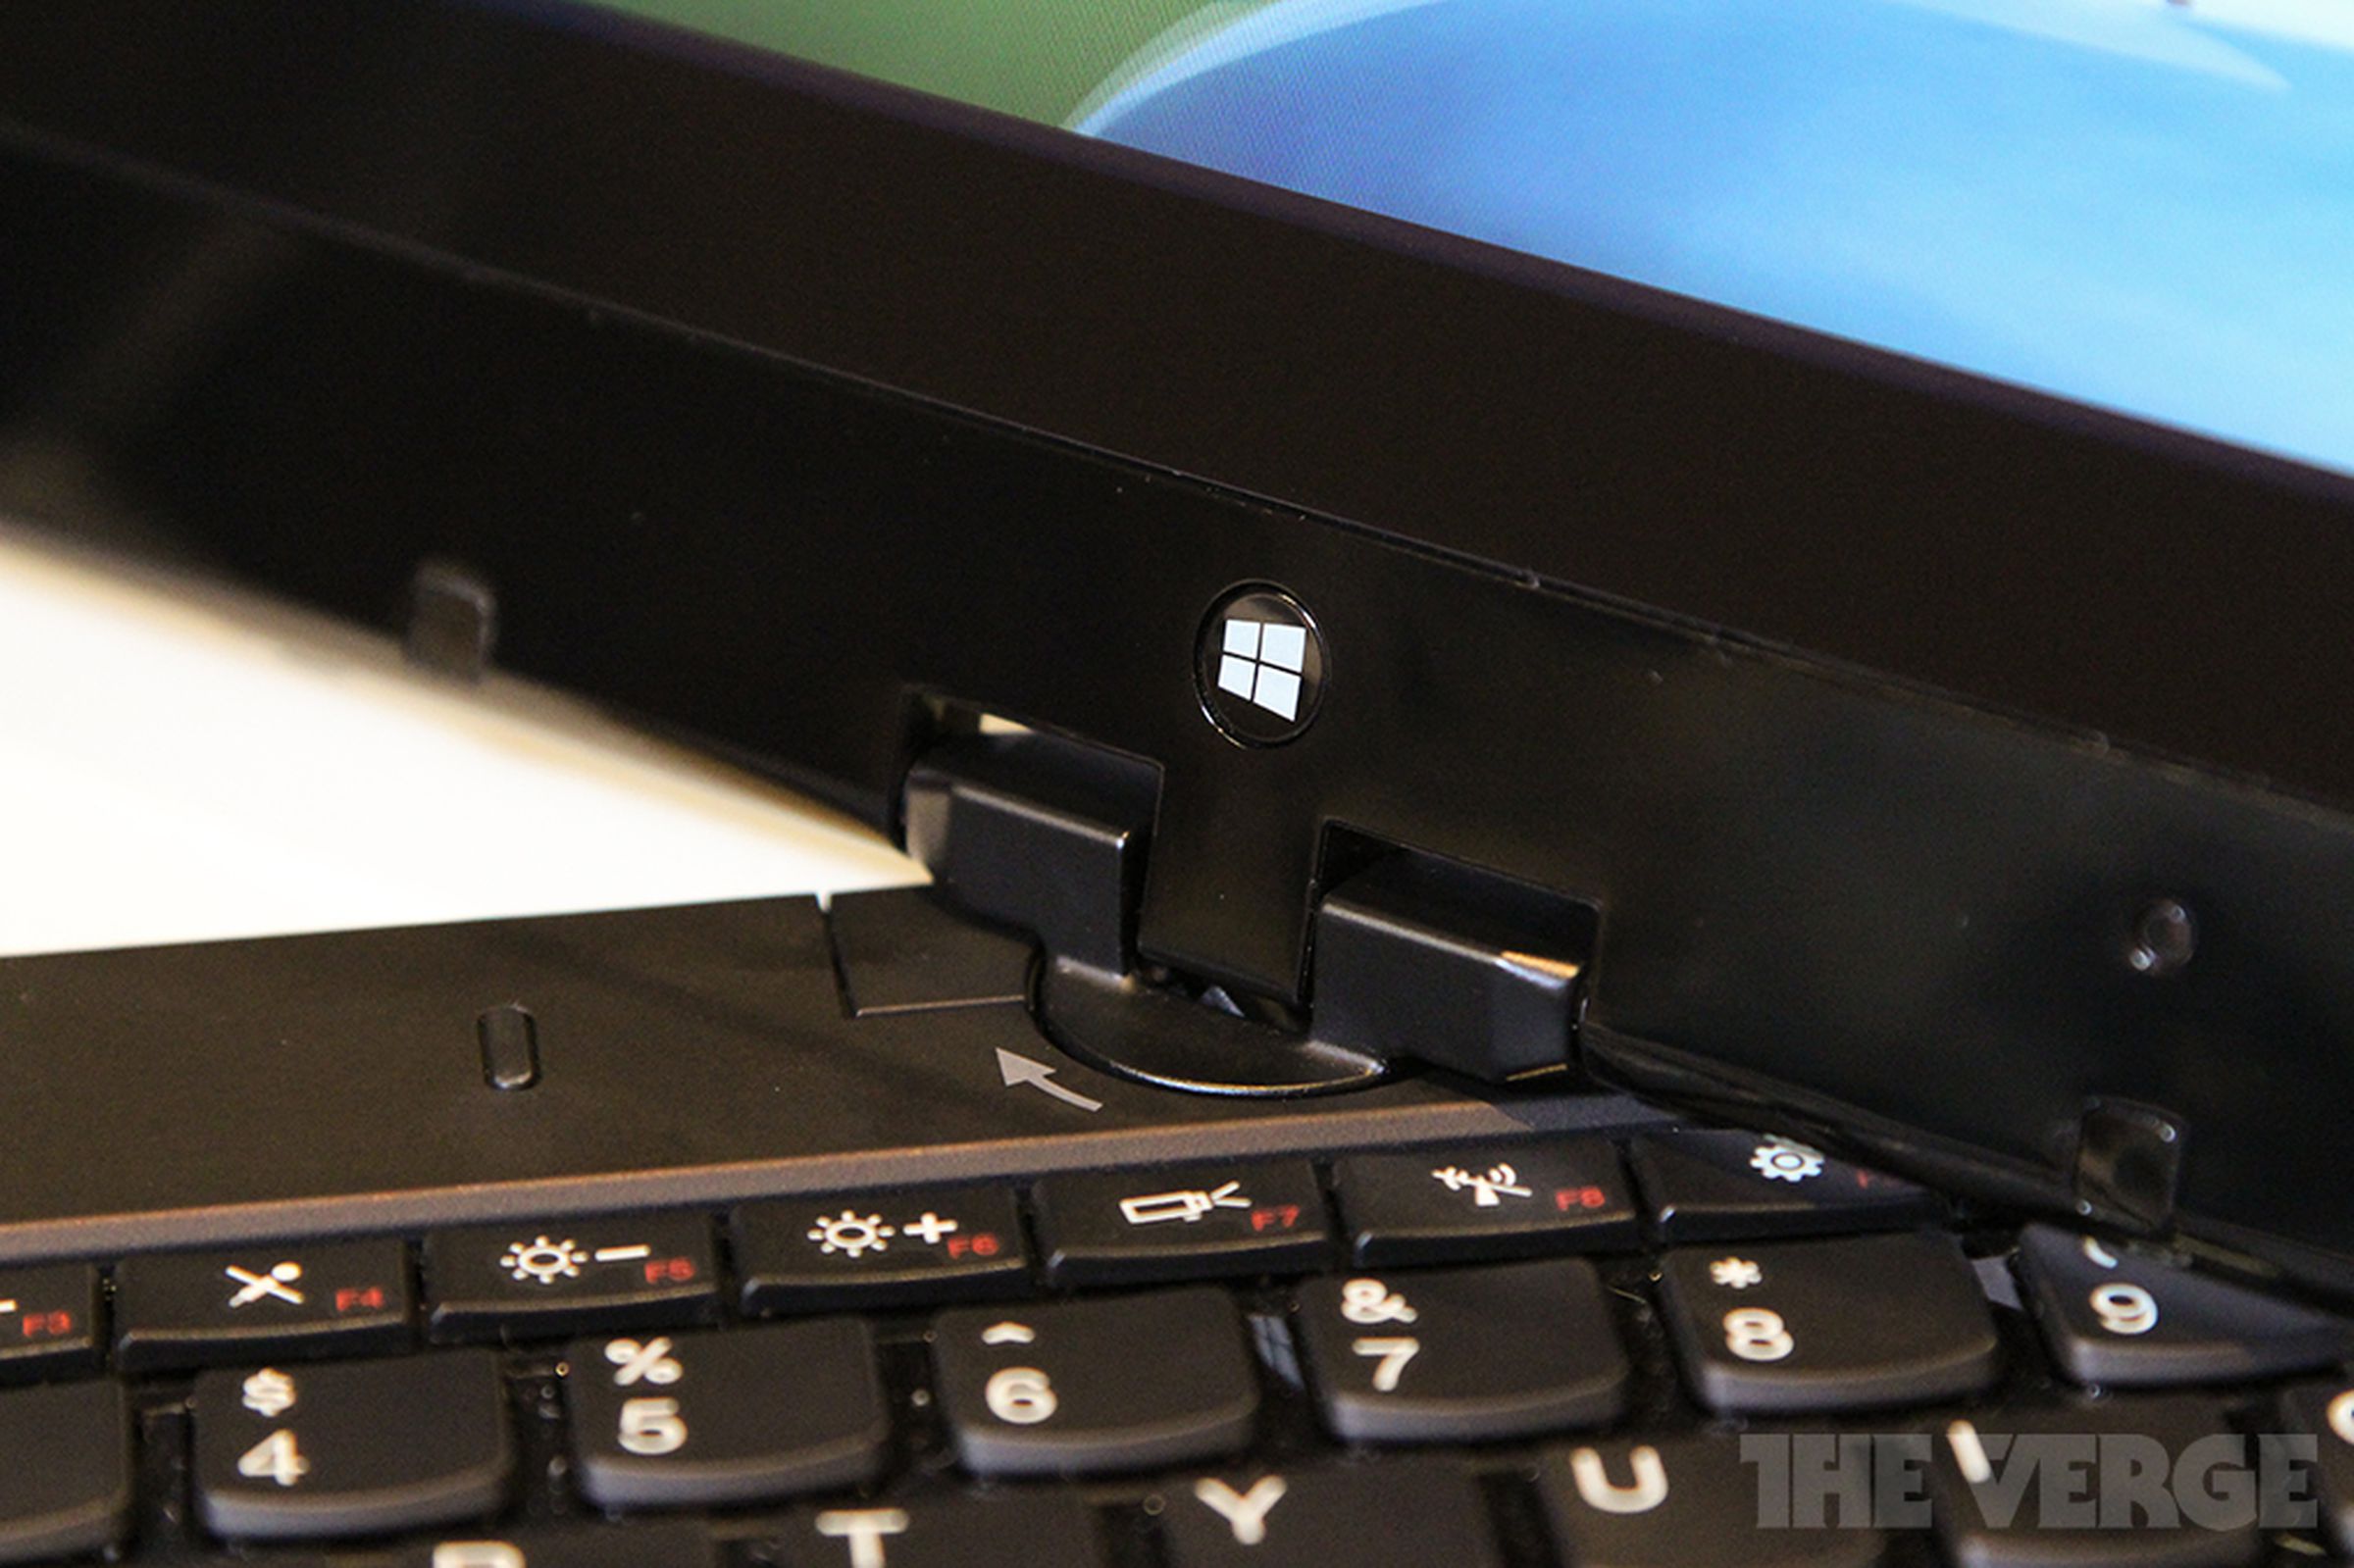 Lenovo ThinkPad Twist hands-on pictures